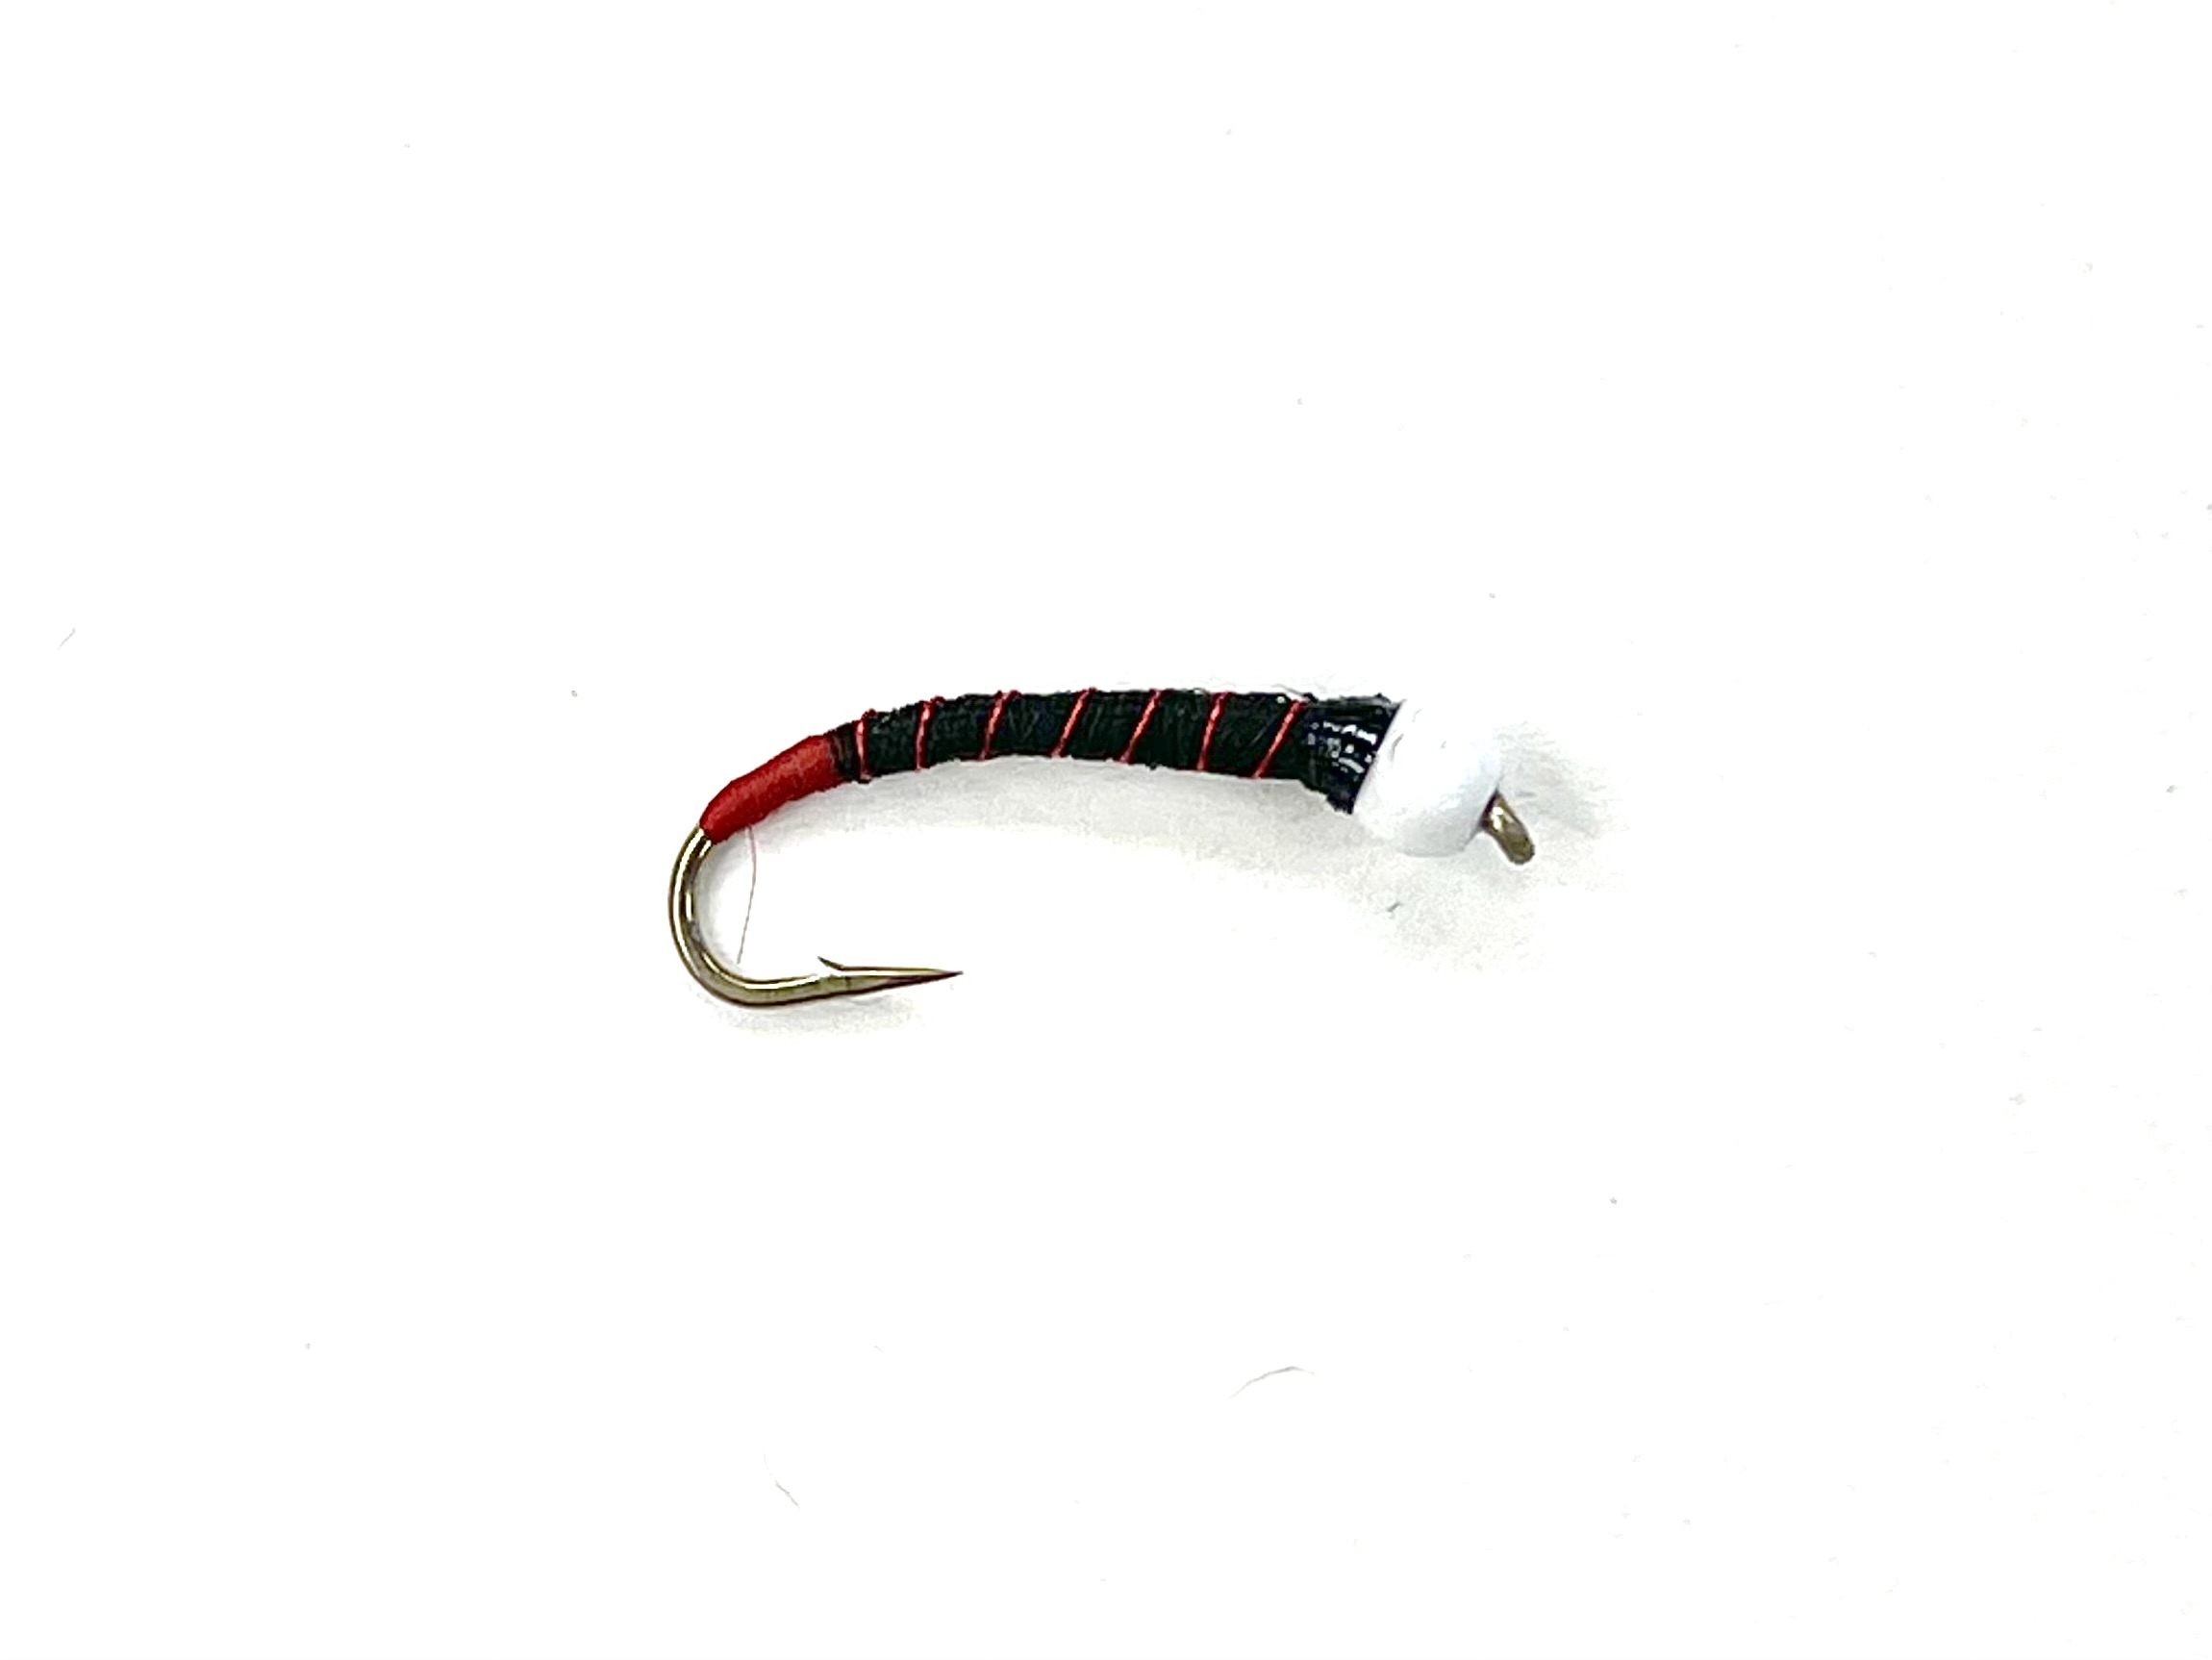 FAD Candy Cone Red Butt Chironomid - Black/Red Wire - Size 12